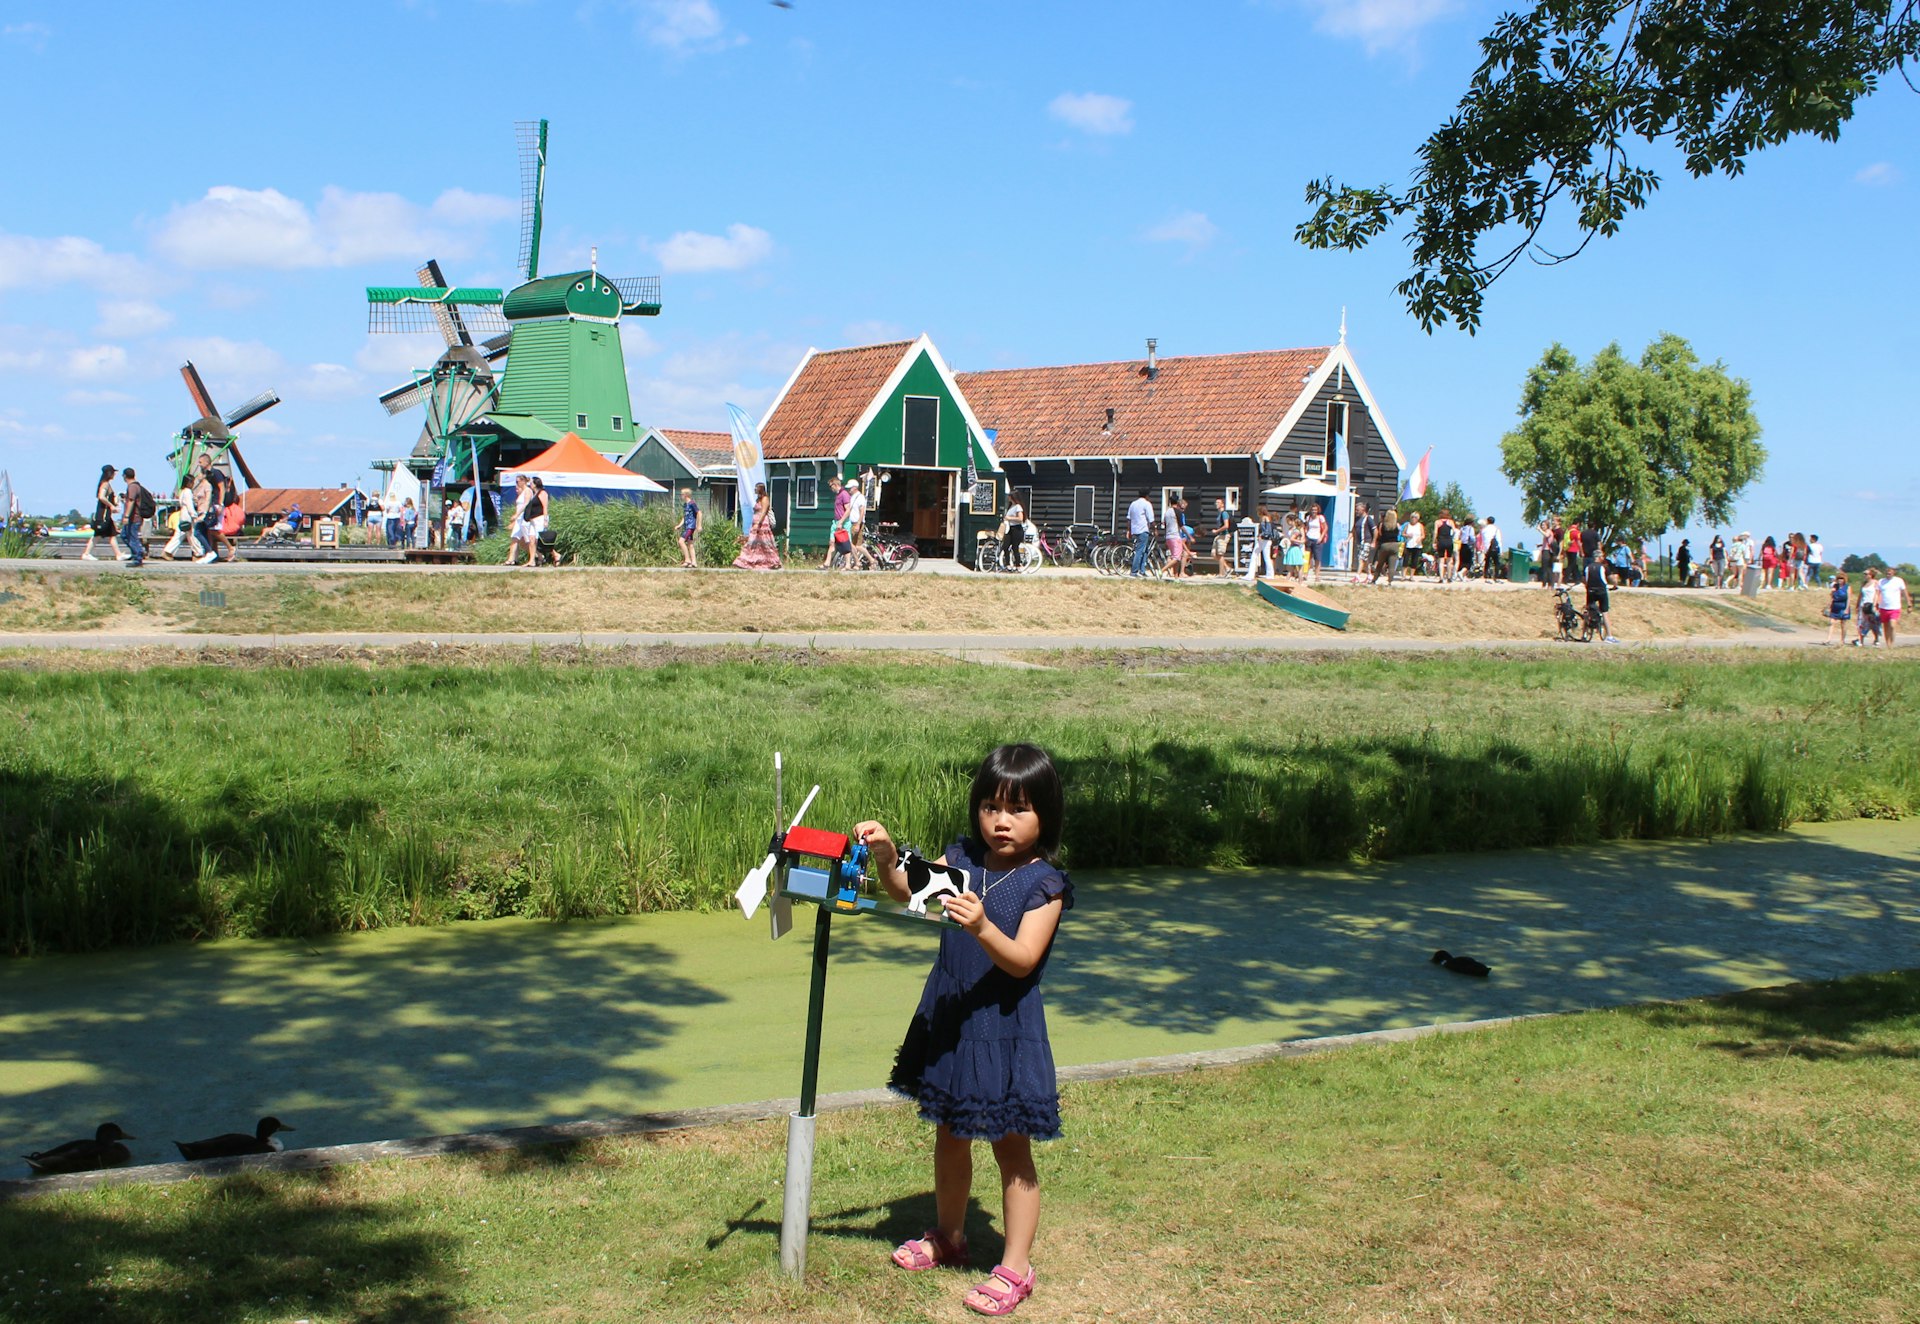 A girl plays with a toy windmill near the real windmills of Zaanse Schans, Netherlands